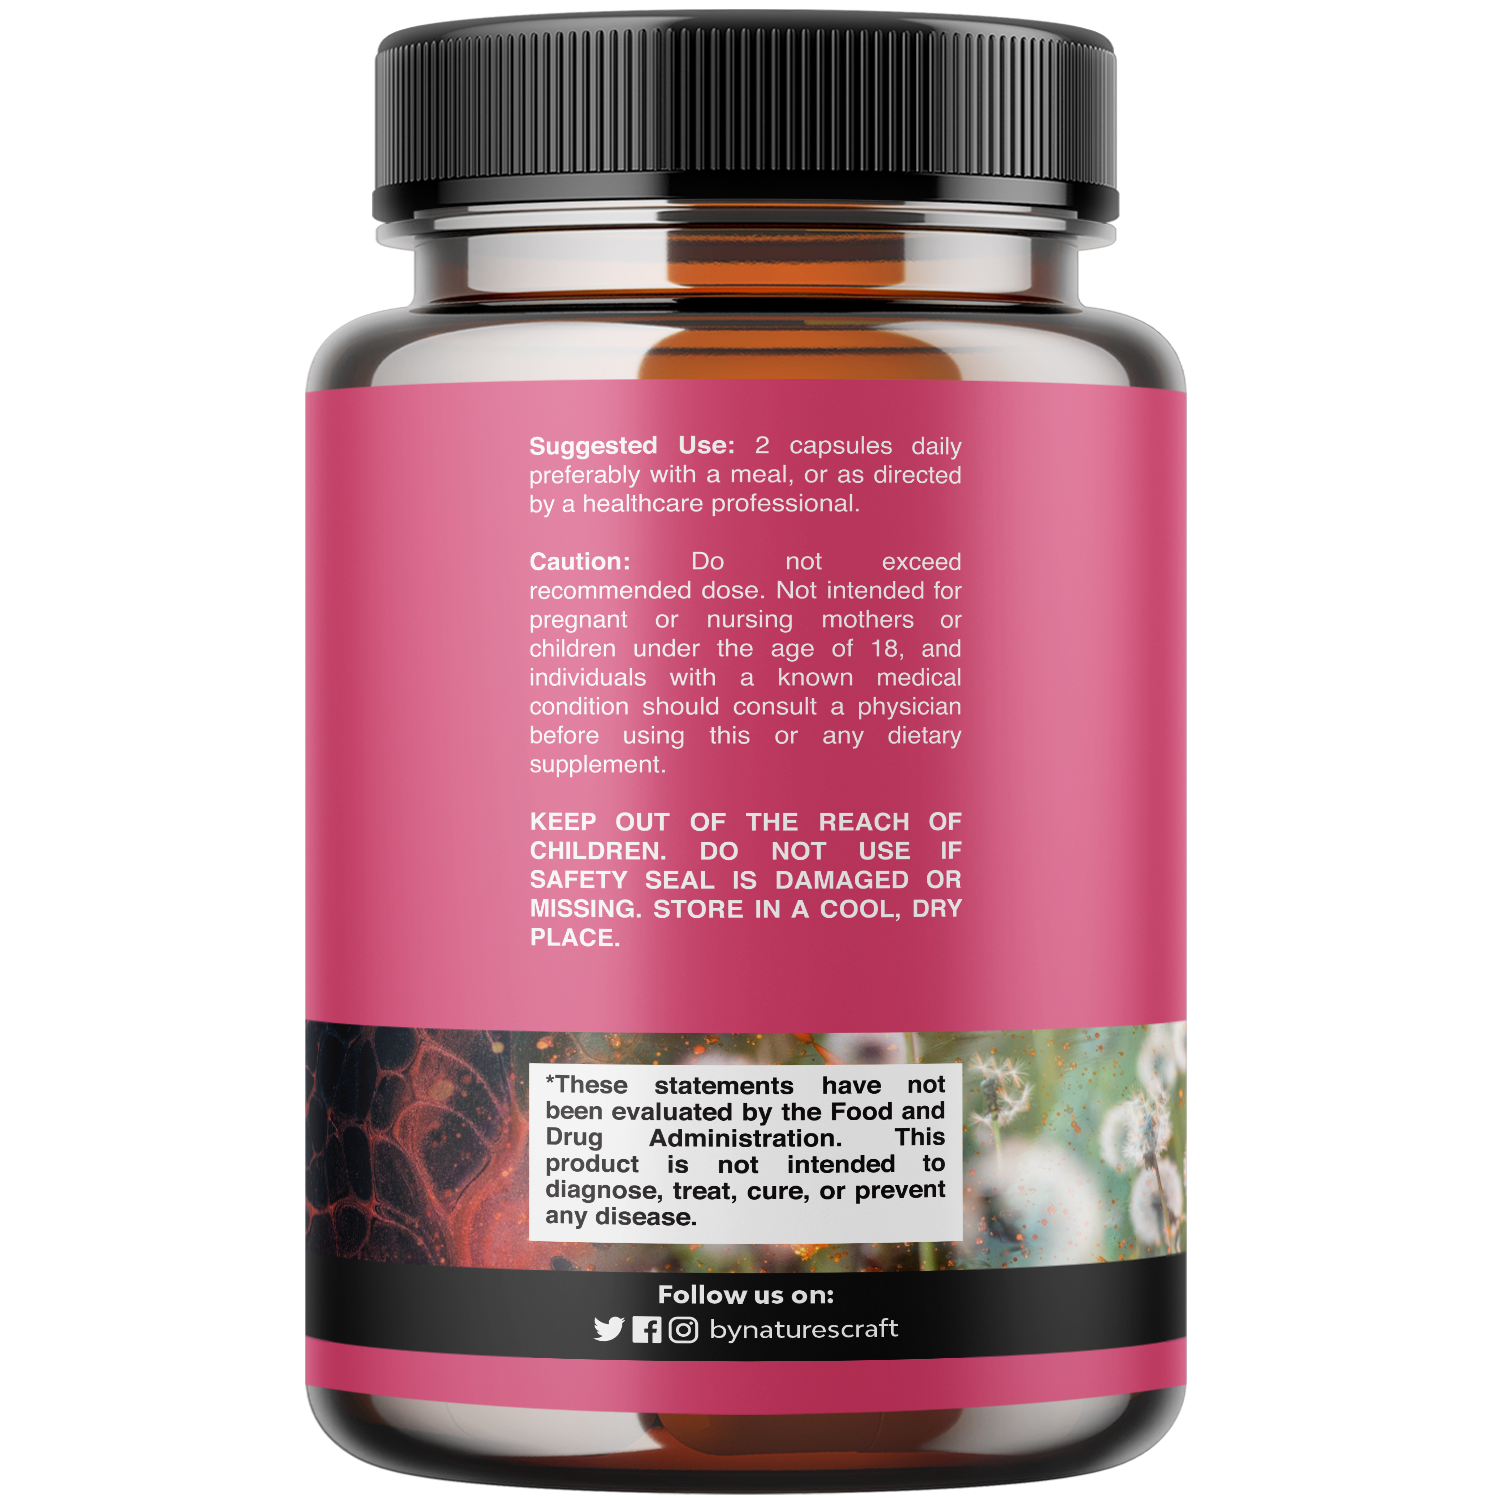 PMS Support - 120 Capsules